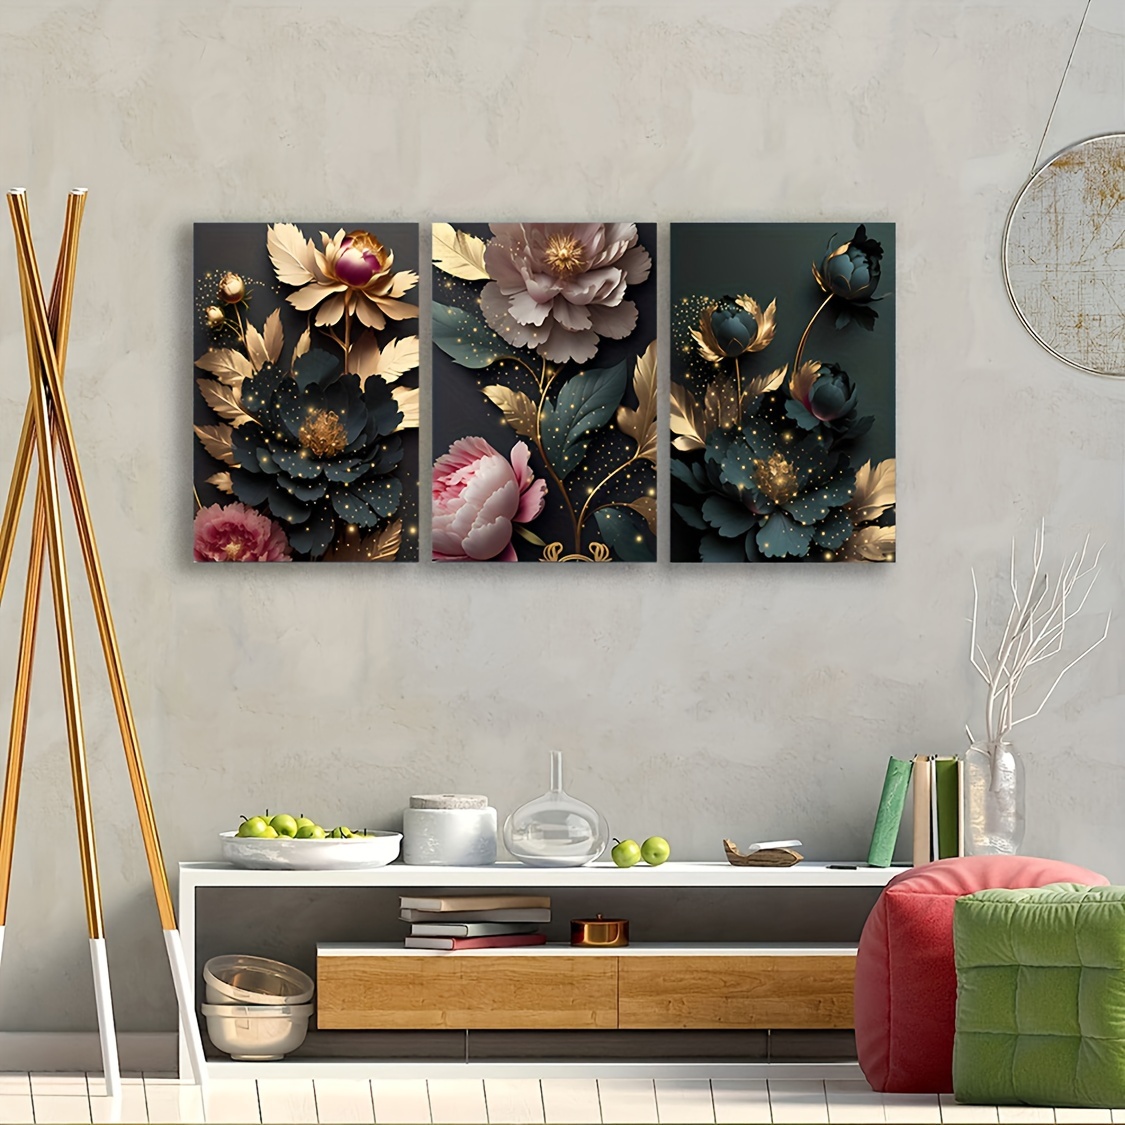 

3pcs Canvas Prints, Black Golden Flowers Decorative Painting, Modern Luxury Wall Art Decor, Poster Picture For Living Room Wall Decor, Office Wall Decor, Bedroom Wall Decor, No Frame, 15.7x23.6 Inch